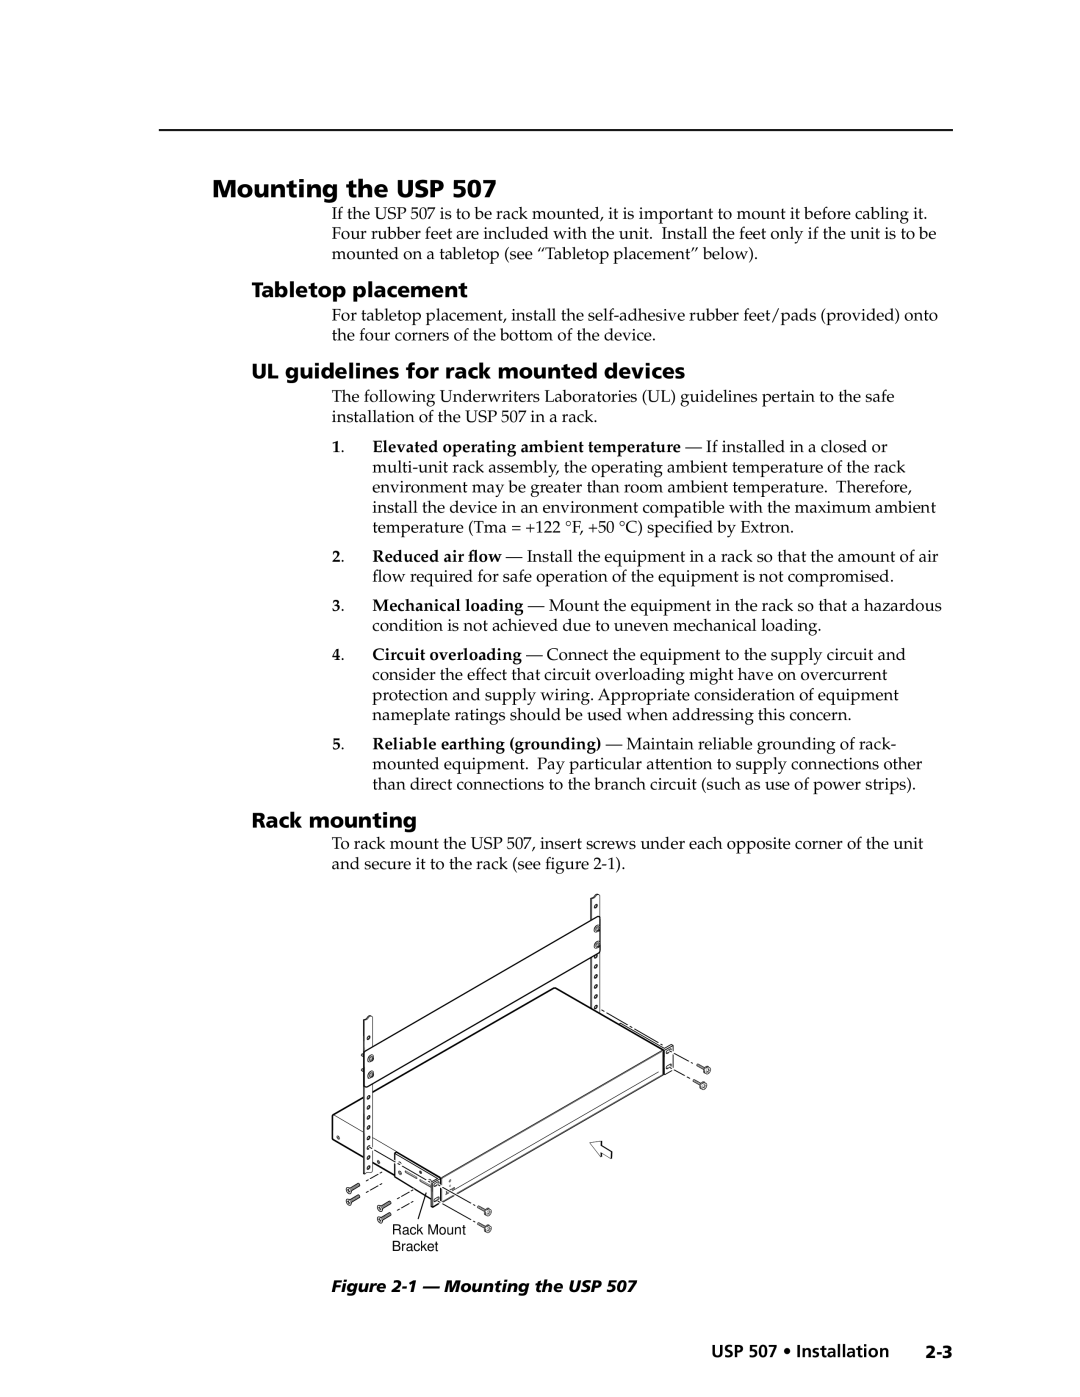 Extron electronic USP 507 Mounting the USP, Tabletop placement, UL guidelines for rack mounted devices, Rack mounting 